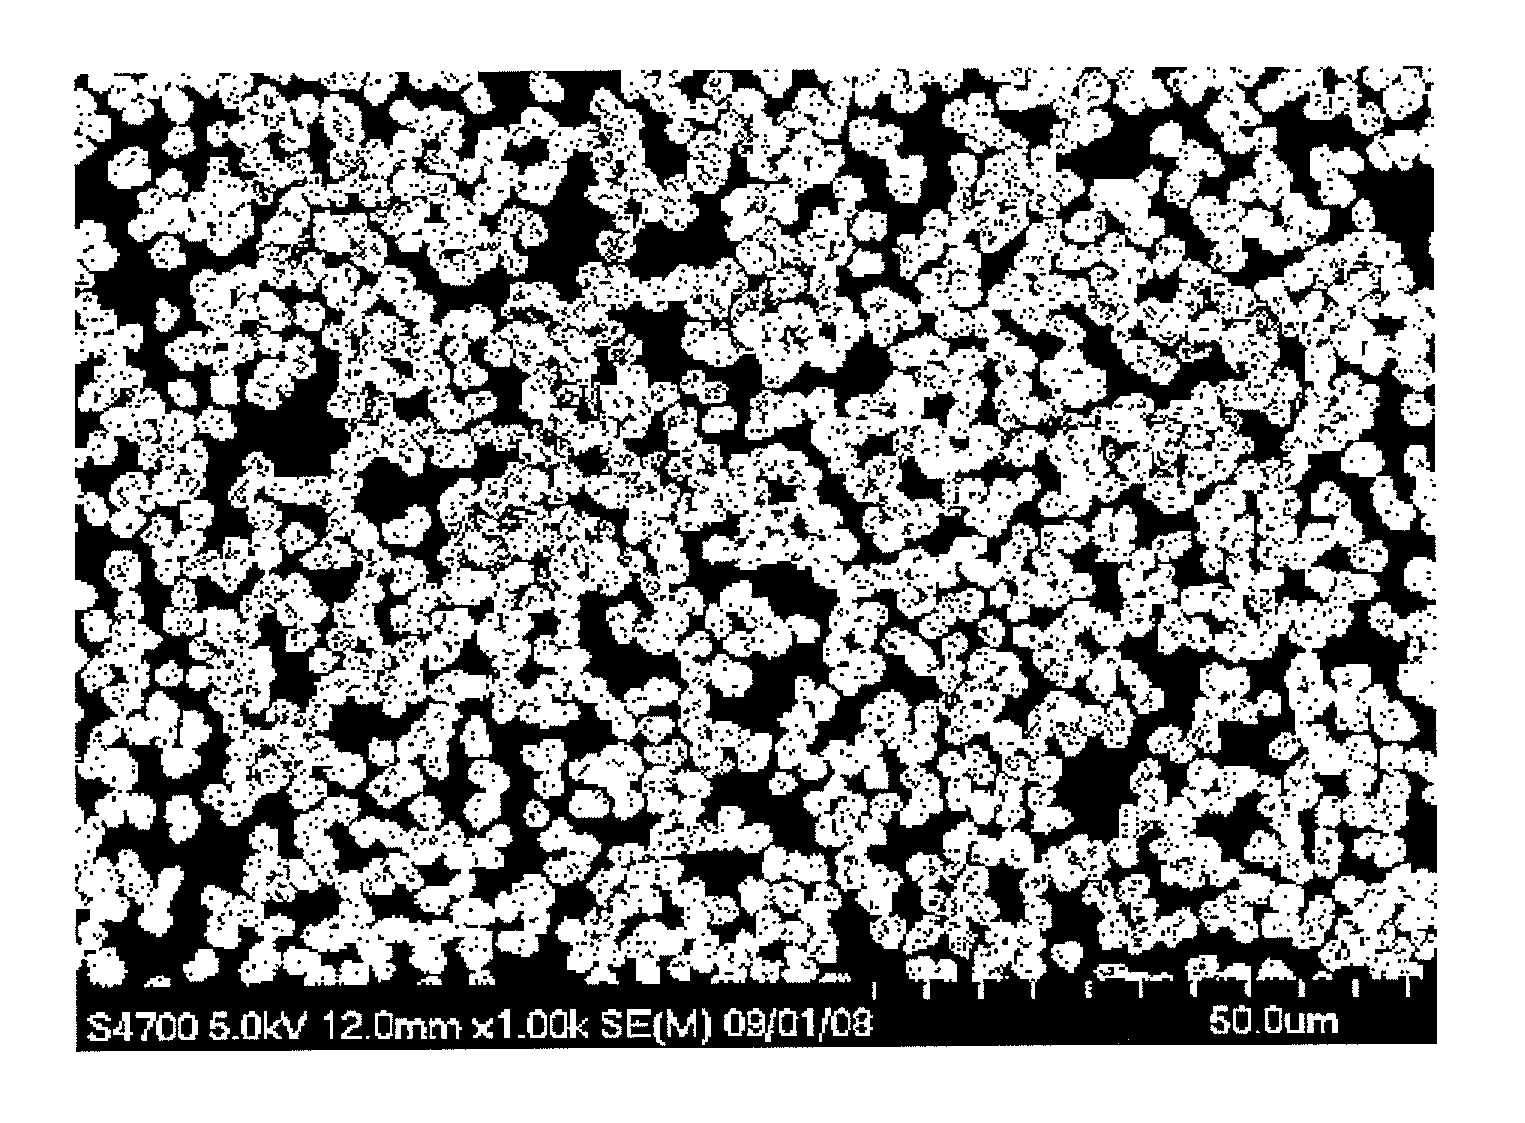 Nickel-cobalt-manganese complex hydroxide particles and method for producing same, positive electrode active material for nonaqueous electrolyte secondary battery and method for producing same, and nonaqueous electrolyte secondary battery